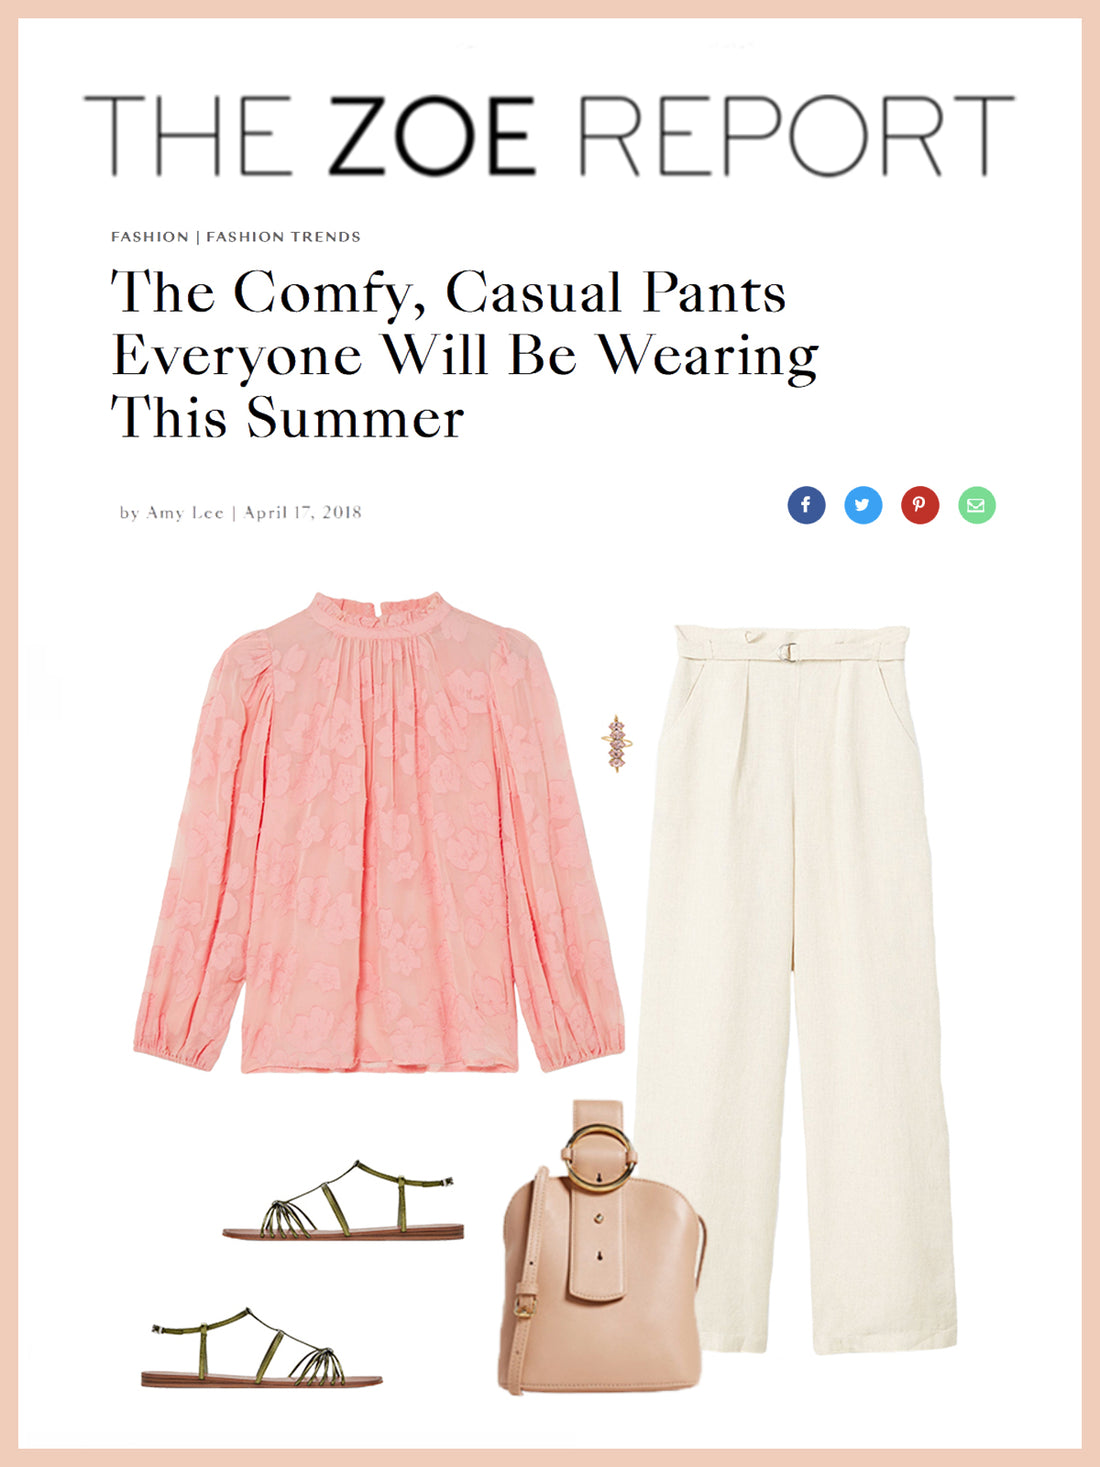 THE ZOE REPORT, The Comfy Casual Pants Everyone Will Be Wearing This Summer